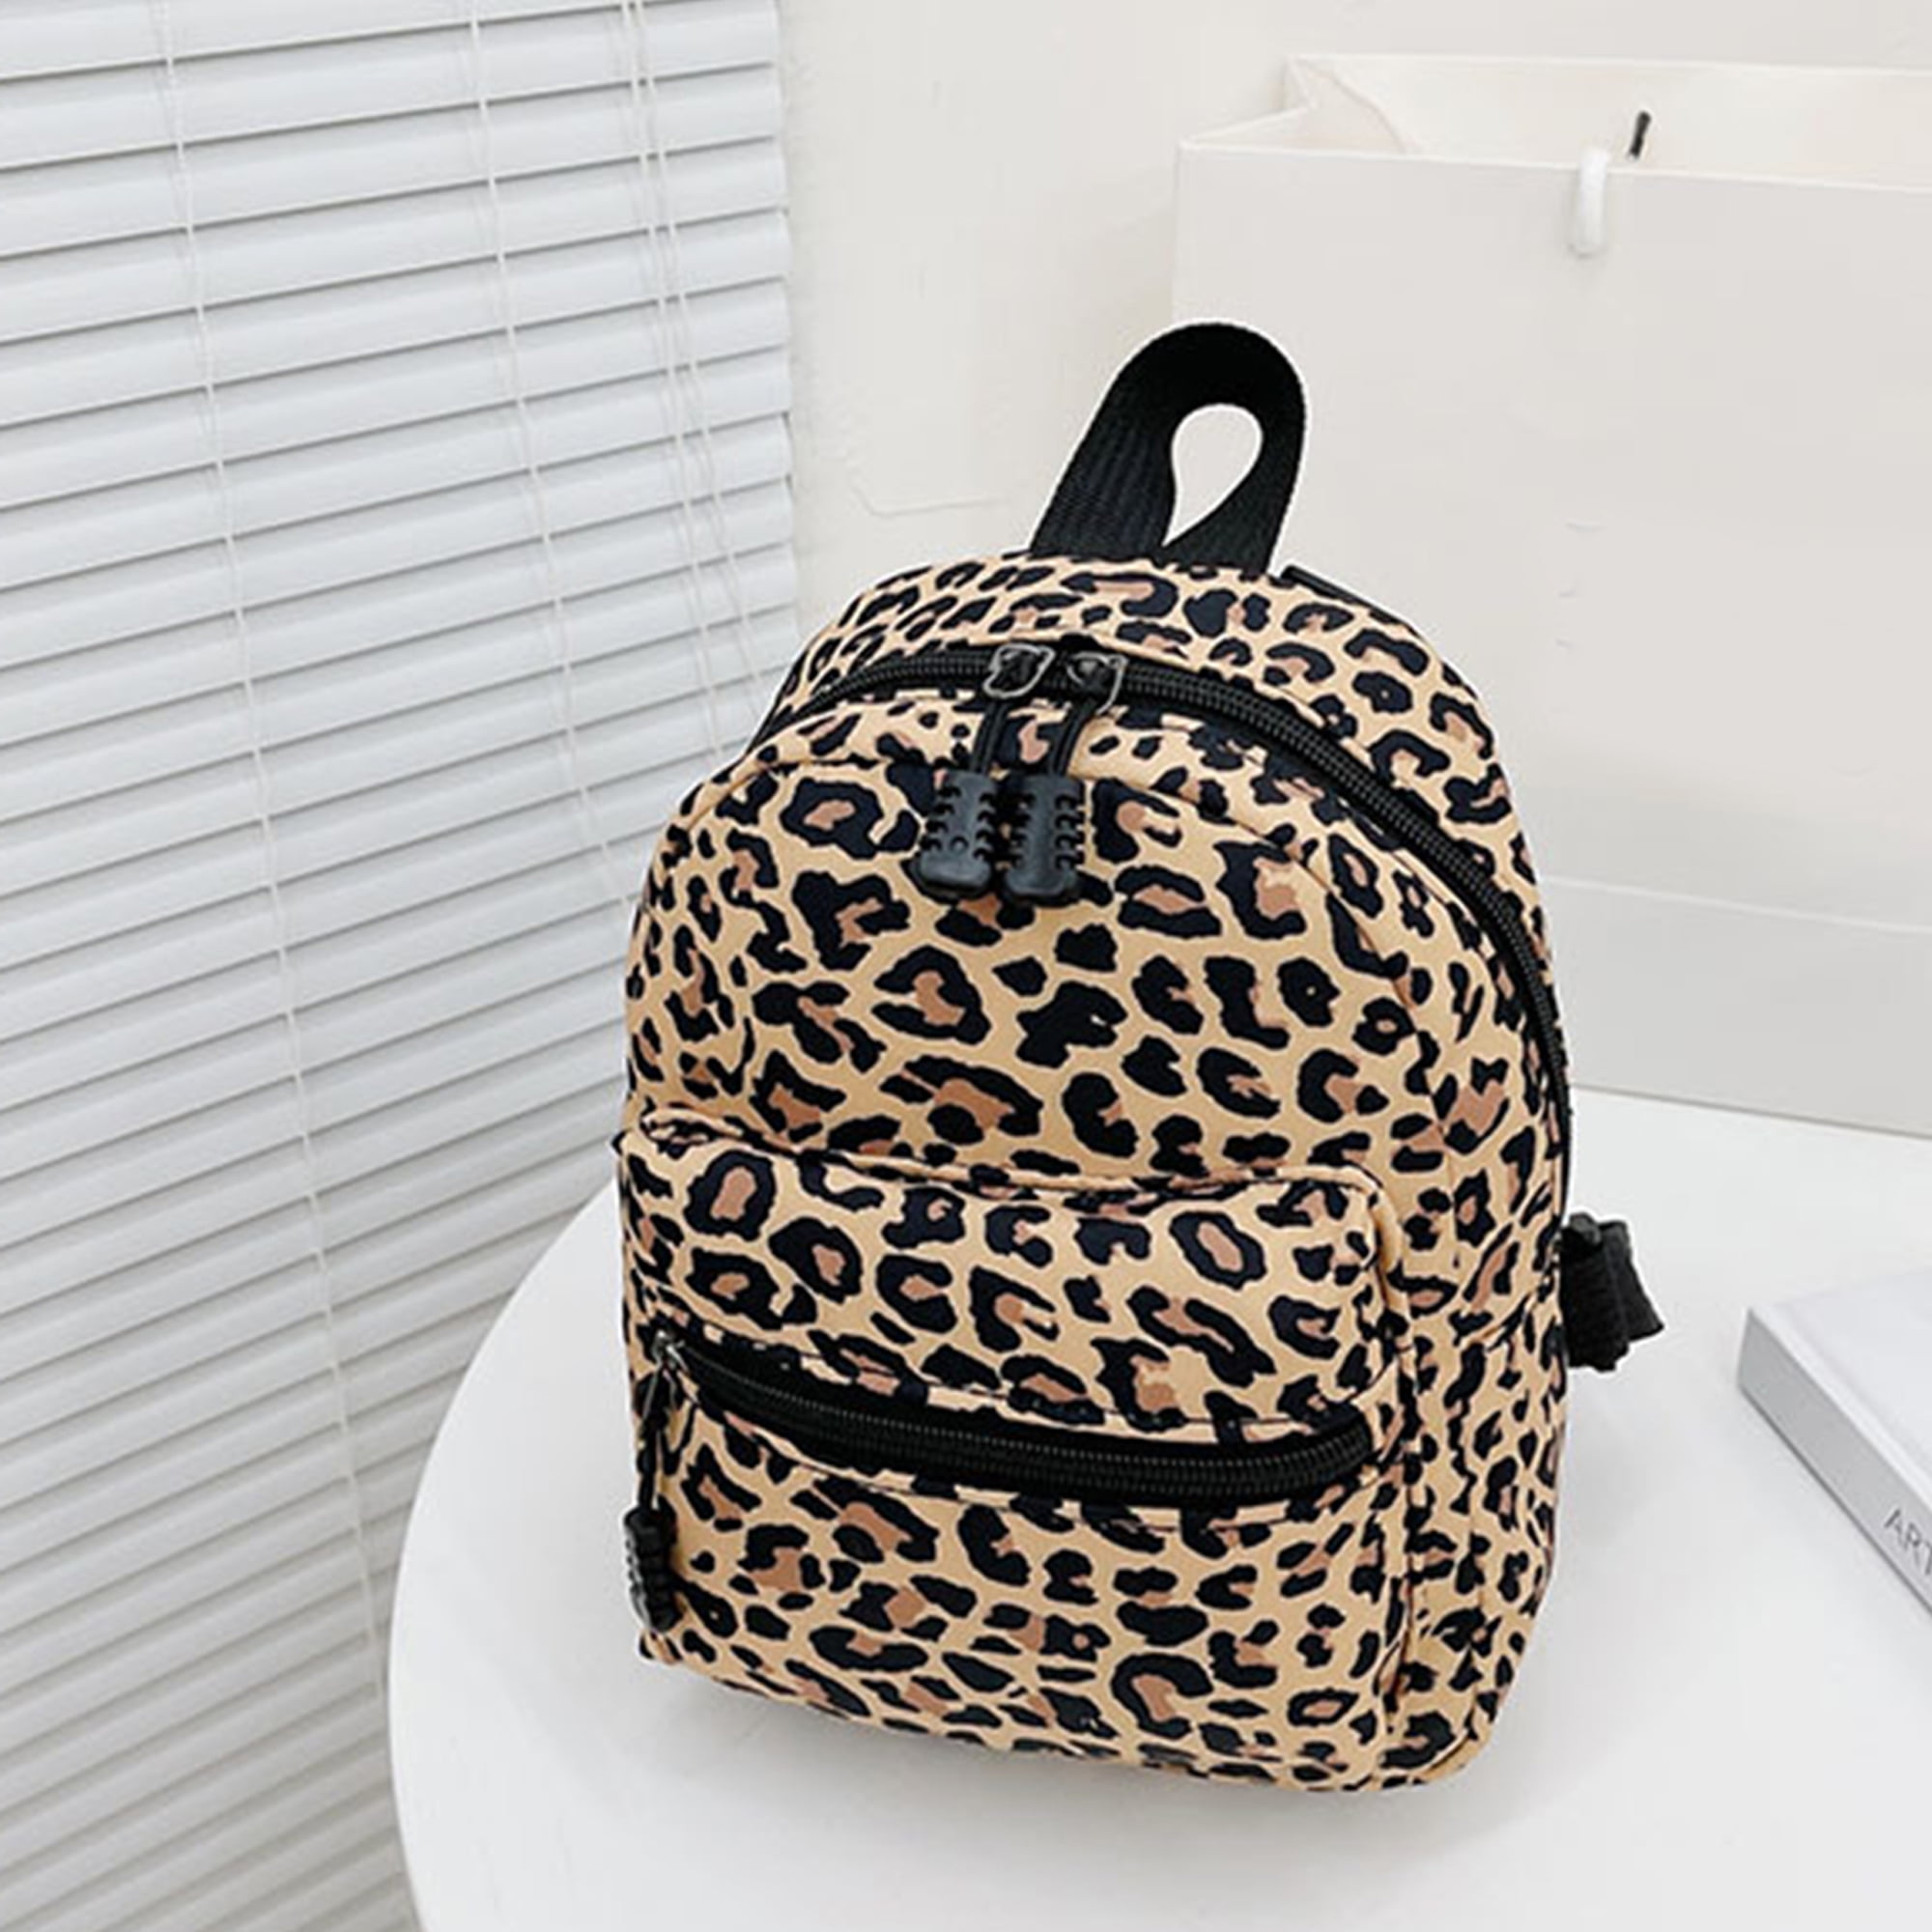 Leopard Faux Leather Backpack Tote | Wholesale Accessory Market